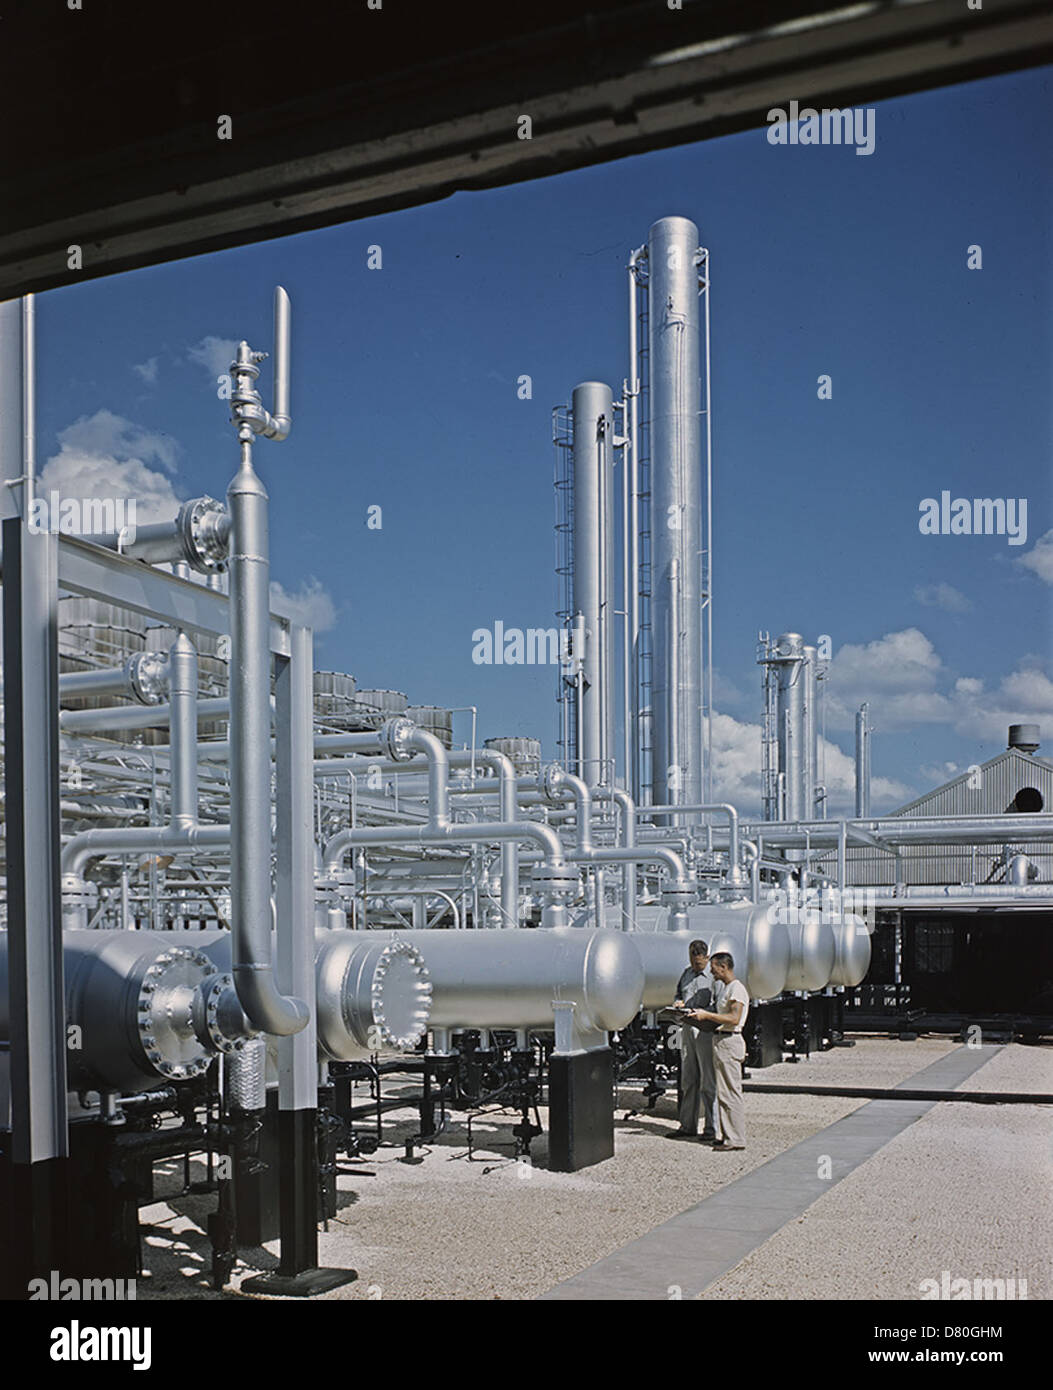 Superior Oil Co., Lake Creek [Field] recycling plant, Texas Stock Photo